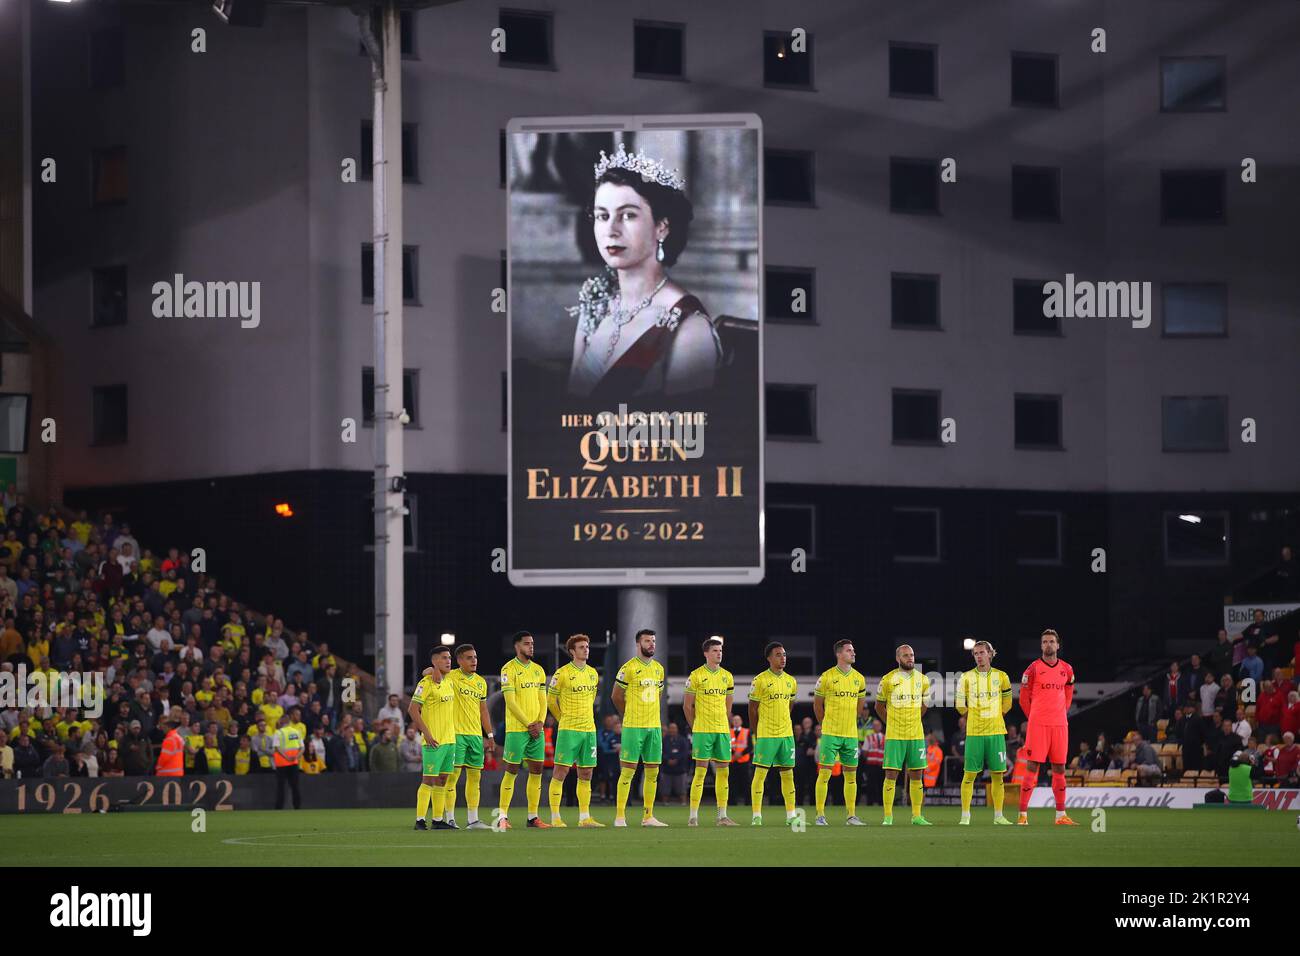 A minute of silence is observed in memory of Queen Elizabeth II - Norwich City v Bristol City, Sky Bet Championship, Carrow Road, Norwich, UK - 14th September 2022  Editorial Use Only - DataCo restrictions apply Stock Photo